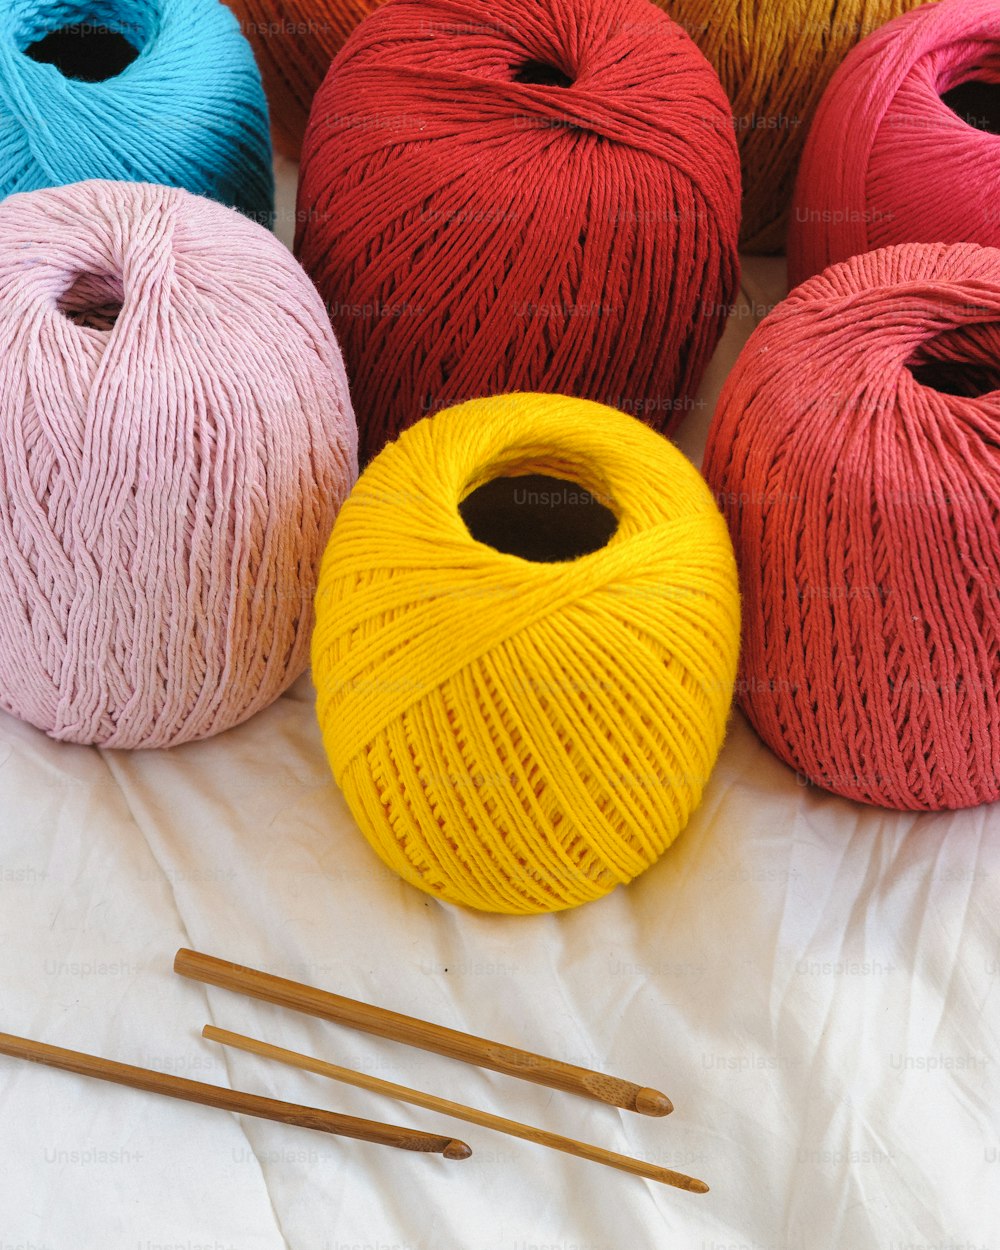 a group of balls of yarn next to knitting needles